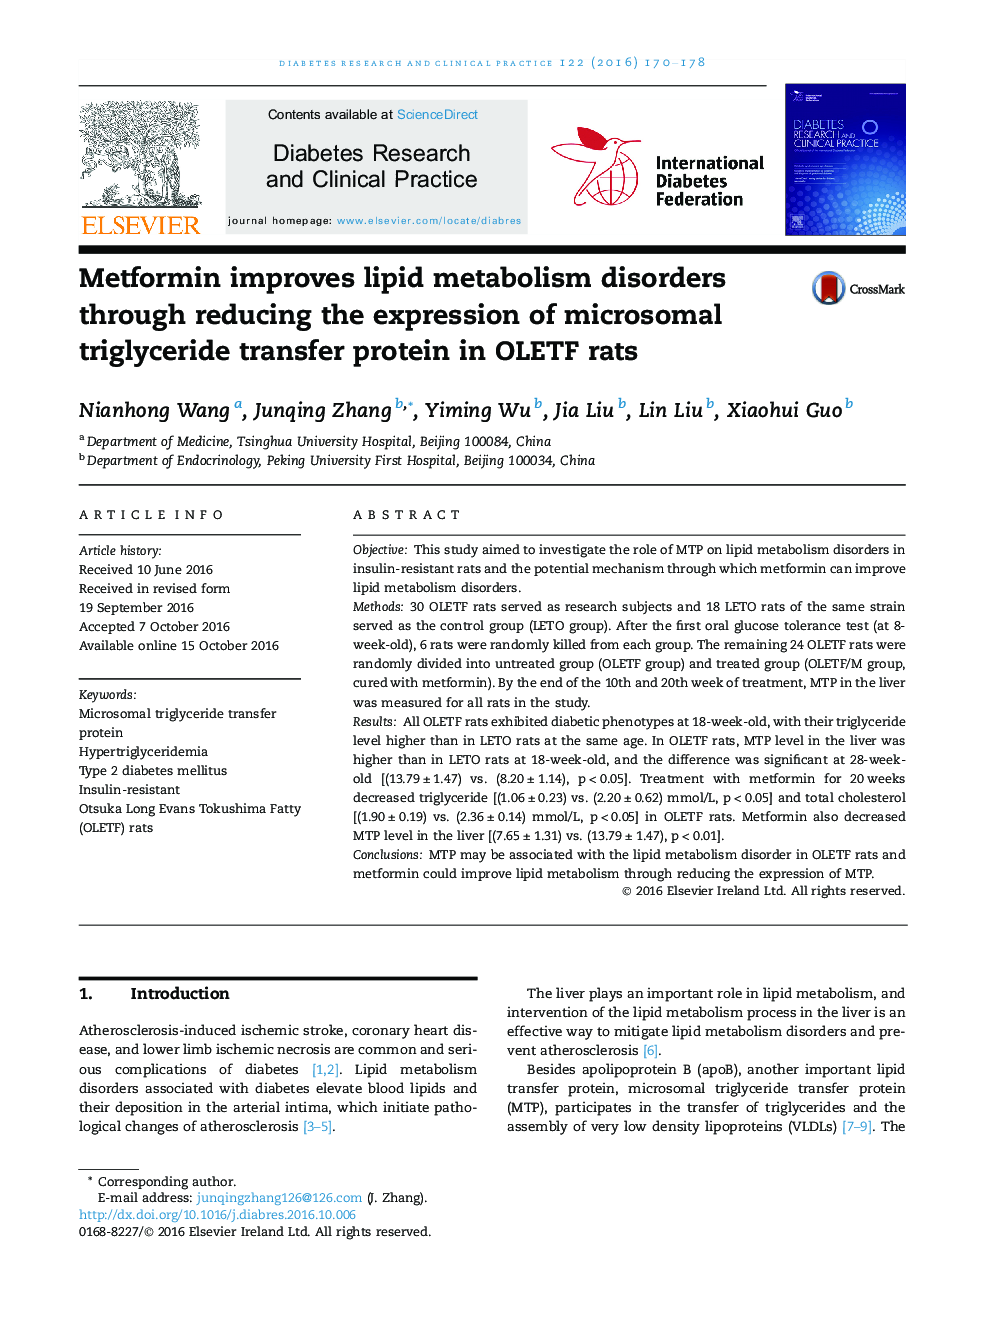 Metformin improves lipid metabolism disorders through reducing the expression of microsomal triglyceride transfer protein in OLETF rats